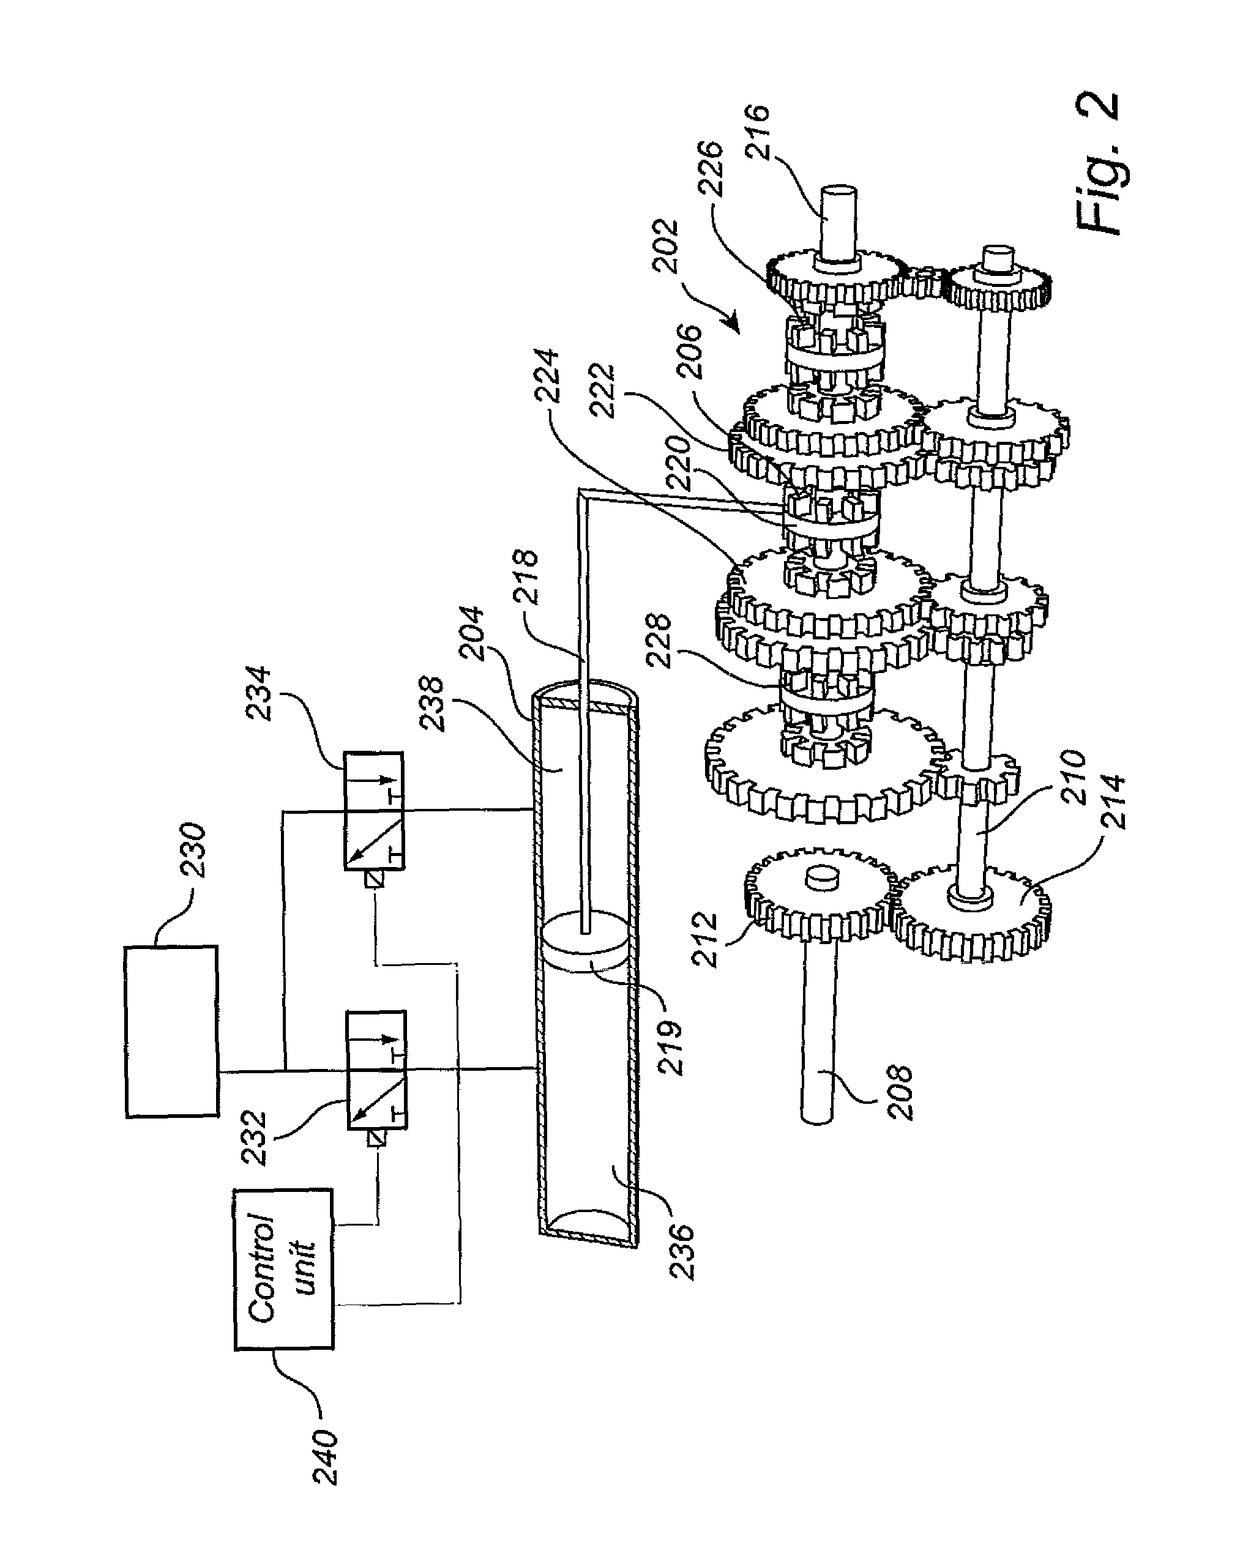 A method for controlling an actuator of a vehicle transmission